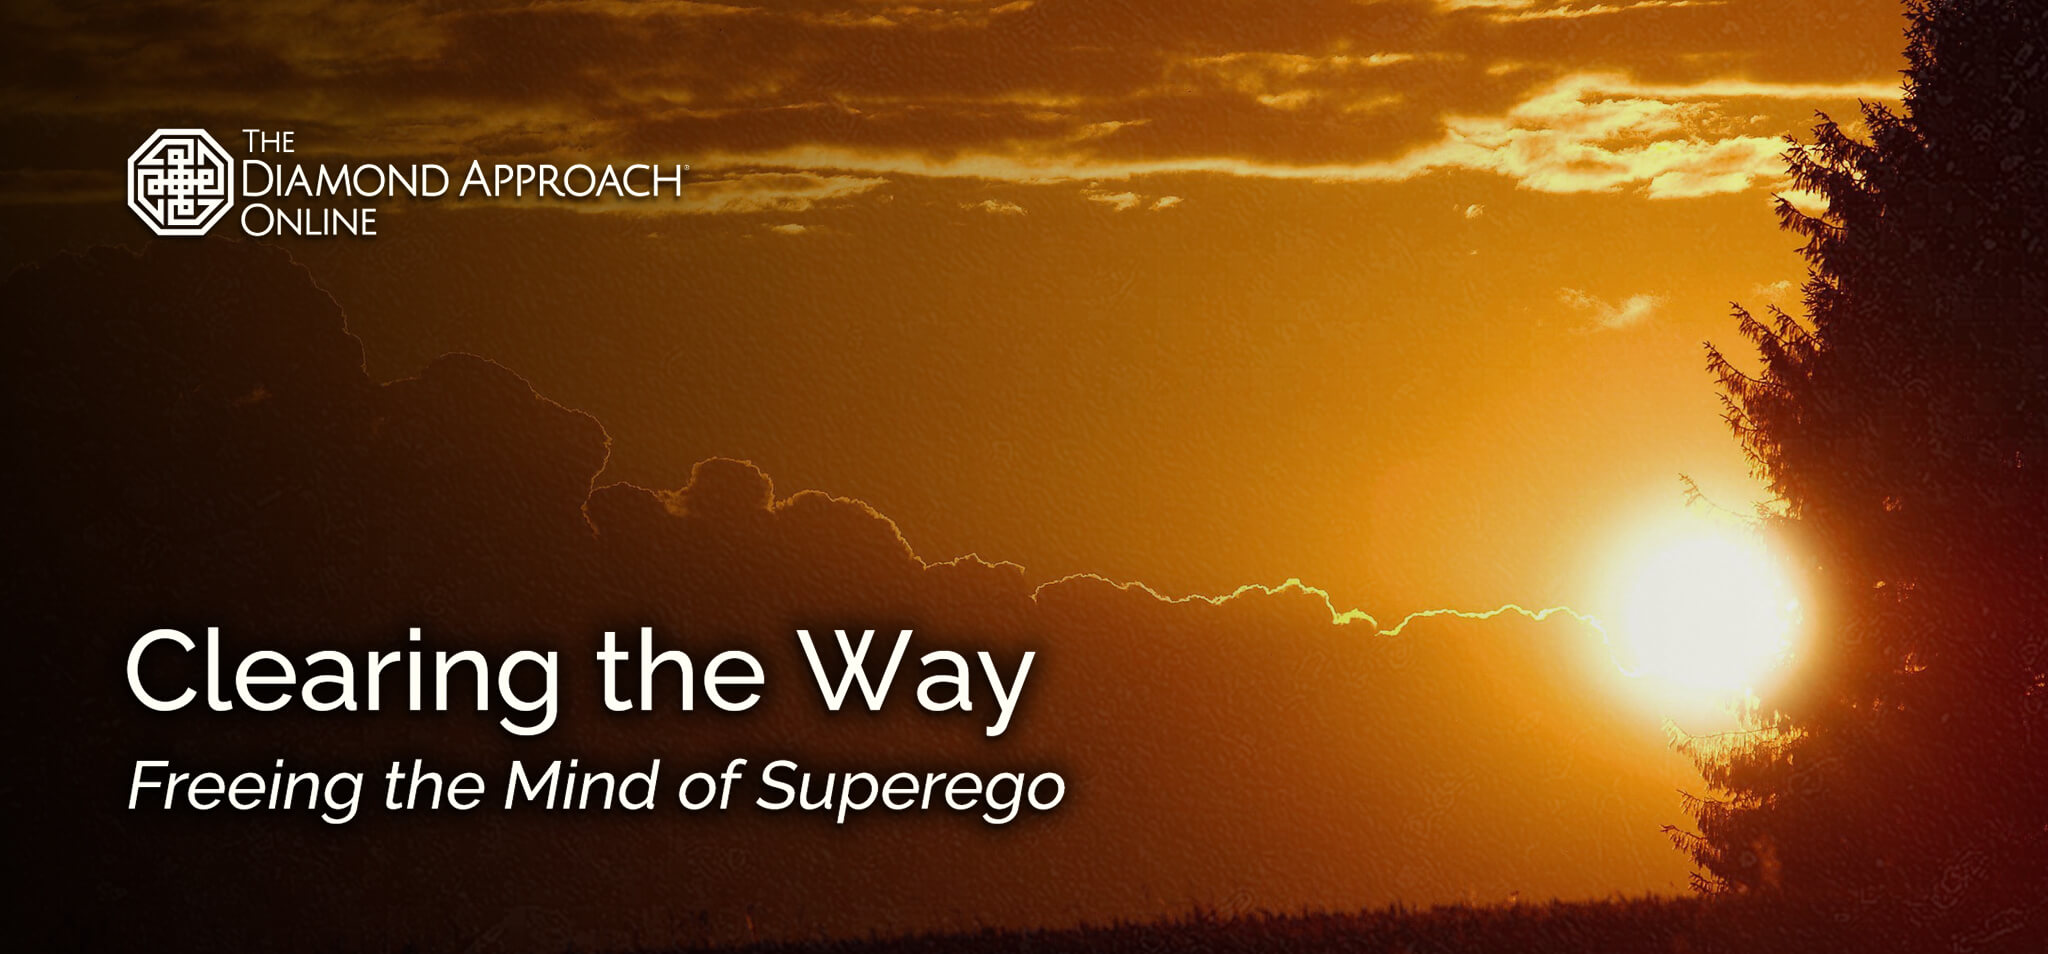 Clearing the Way: Freeing the Mind of Superego